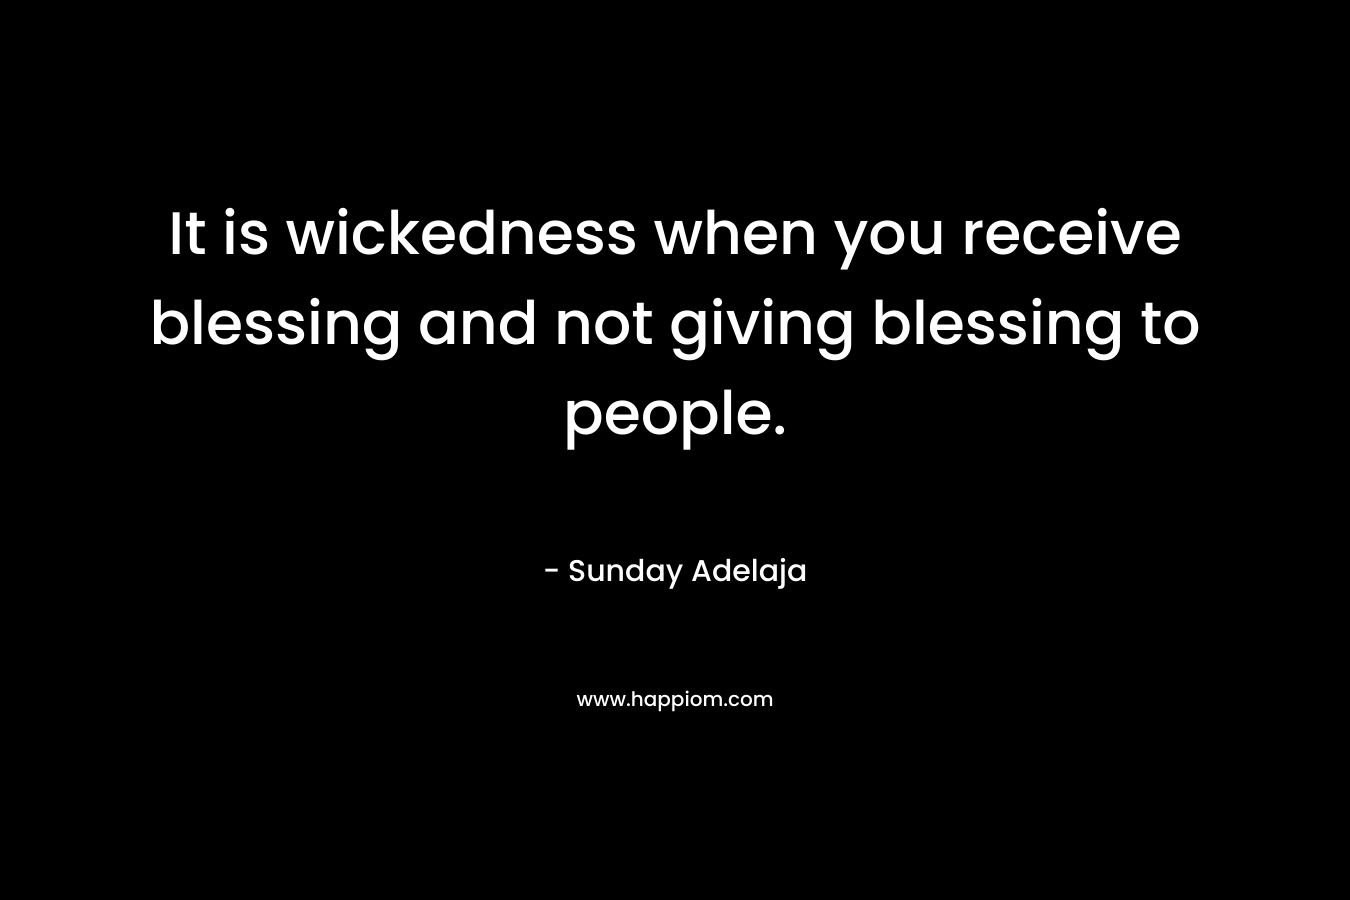 It is wickedness when you receive blessing and not giving blessing to people. – Sunday Adelaja